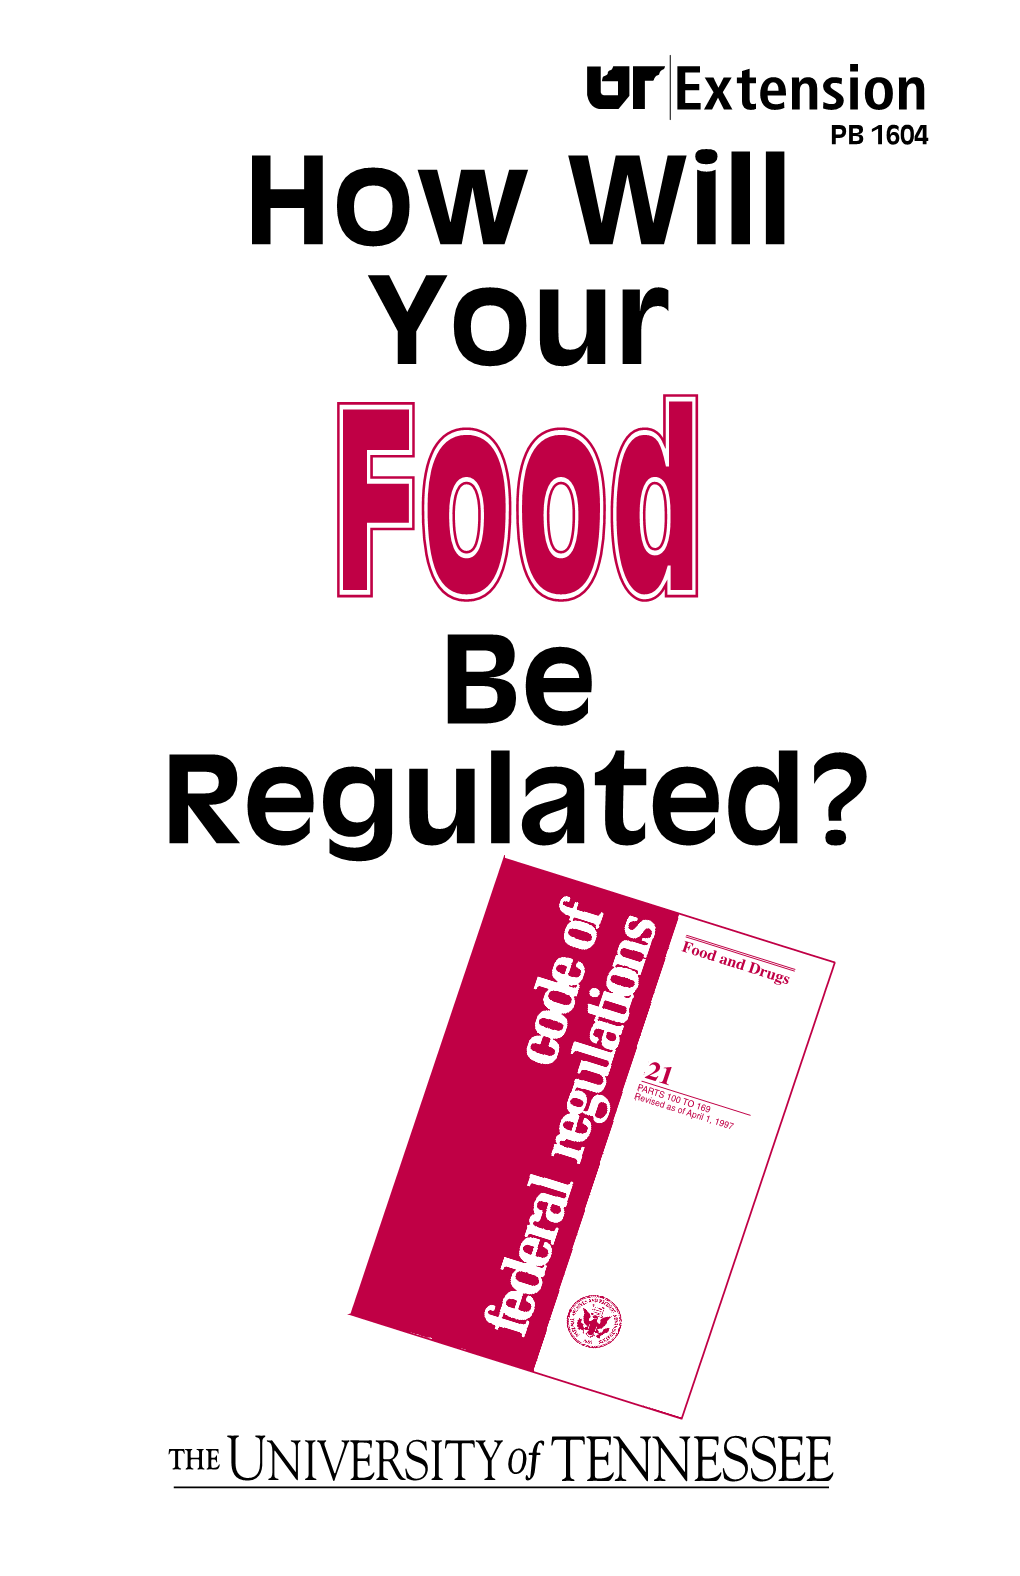 PB1604 How Will Your Food Be Regulated?